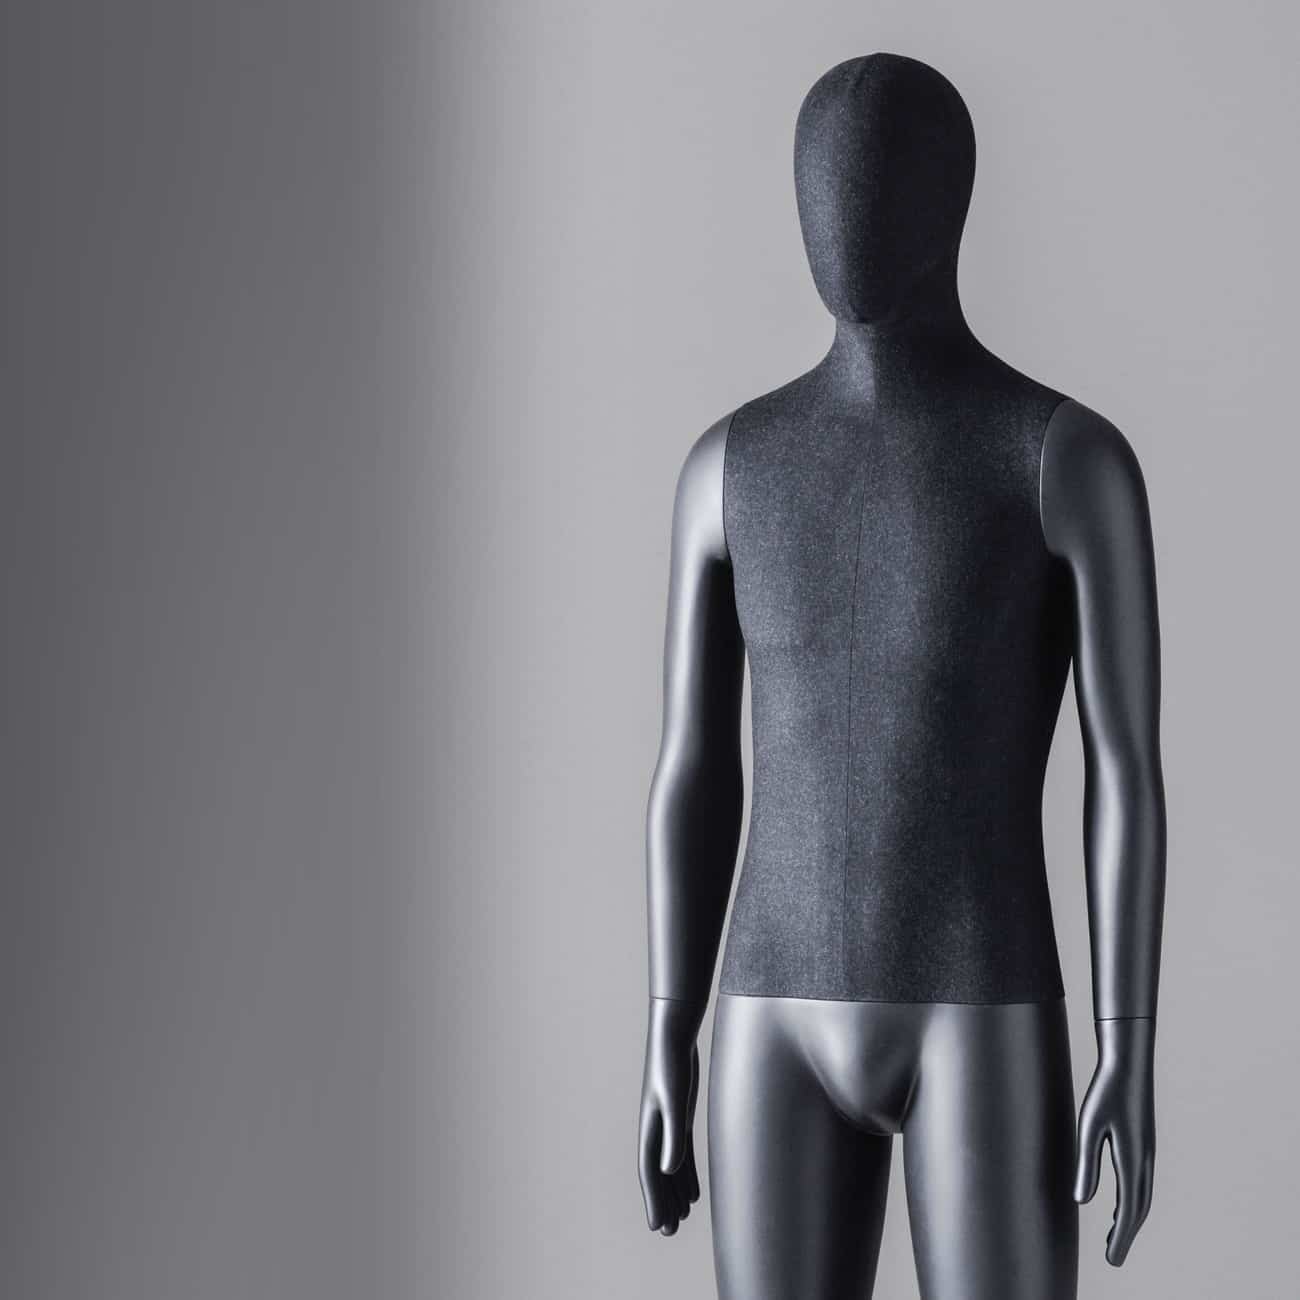 Sartorial Men | Male mannequin with fixed legs and arms